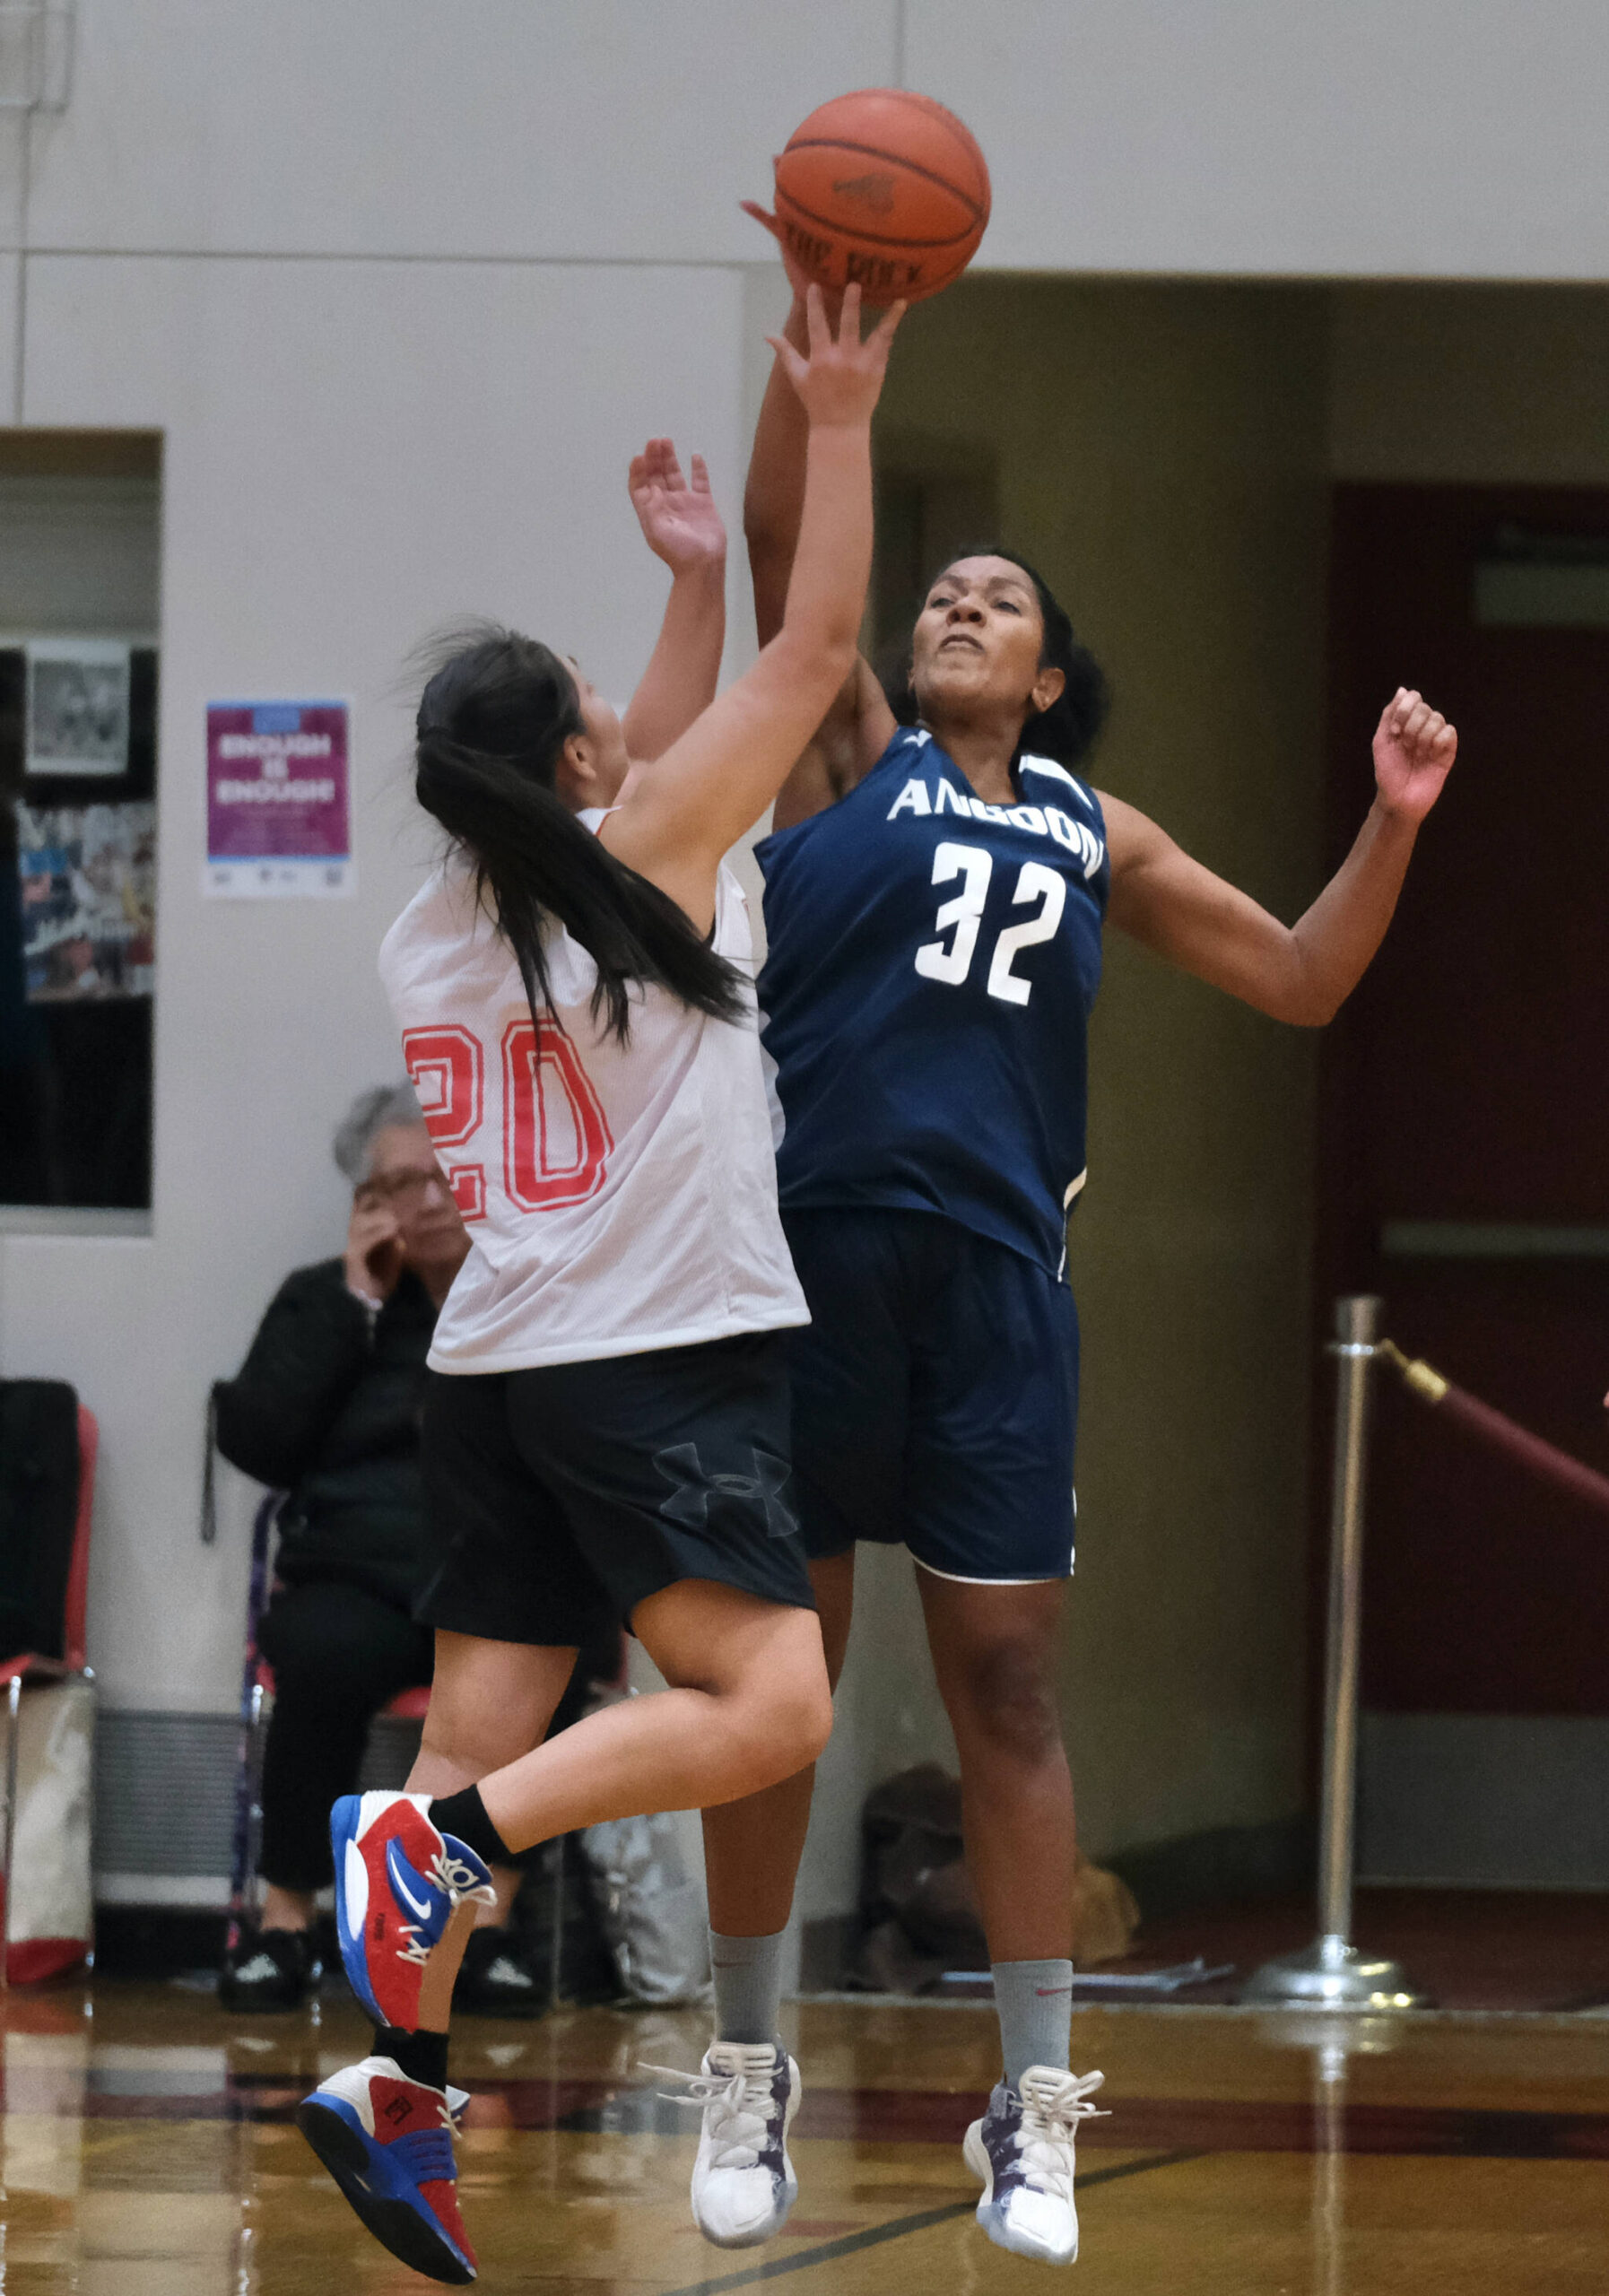 Angoon’s Tasha Heumann (32) blocks a shot by Kake’s Alexis Copsey (20) during Thursday action at the Juneau Lions Club 74th Annual Gold Medal Basketball Tournament at Juneau-Douglas High School: Yadaa.at Kalé. (Klas Stolpe/For the Juneau Empire)